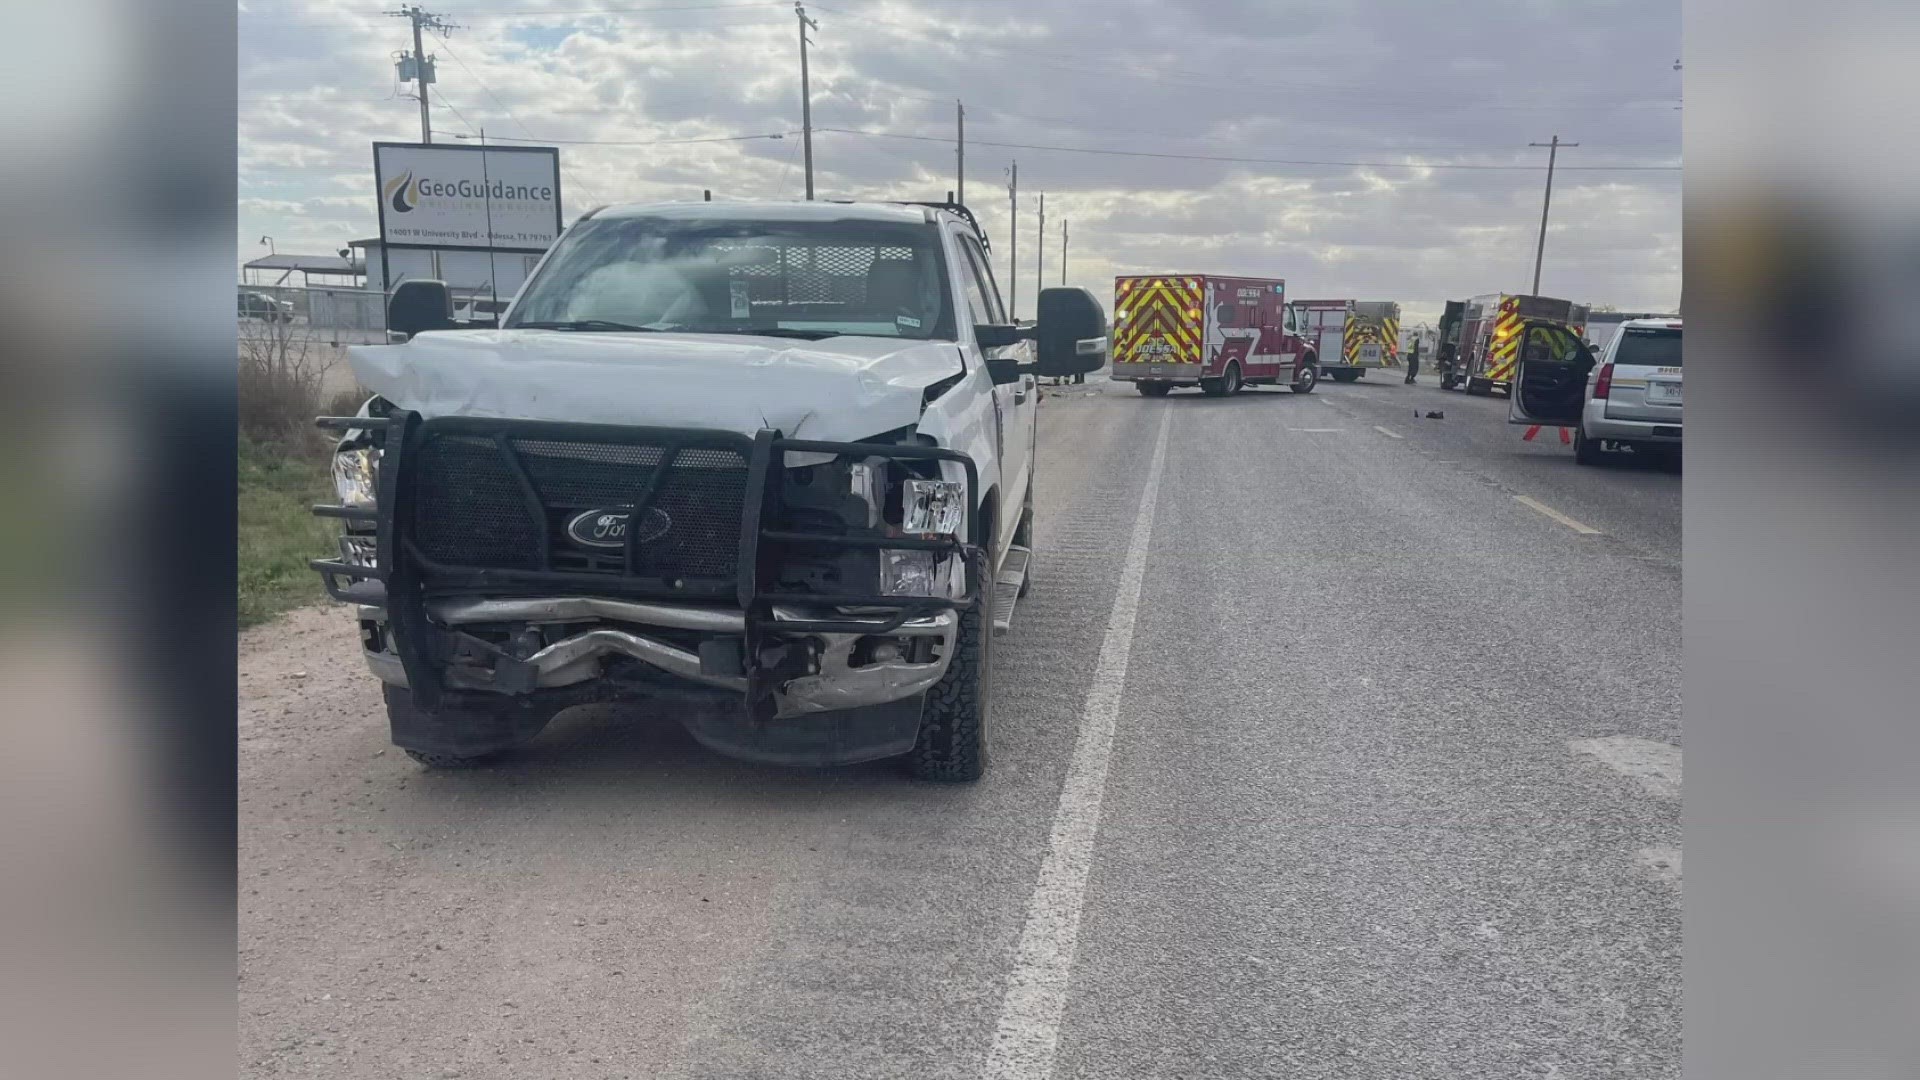 Bellanira Contreras failed to yield the right of way and turned left in front of a 2023 Ford F-250, causing a collision. Contreras died at the scene of the crash.